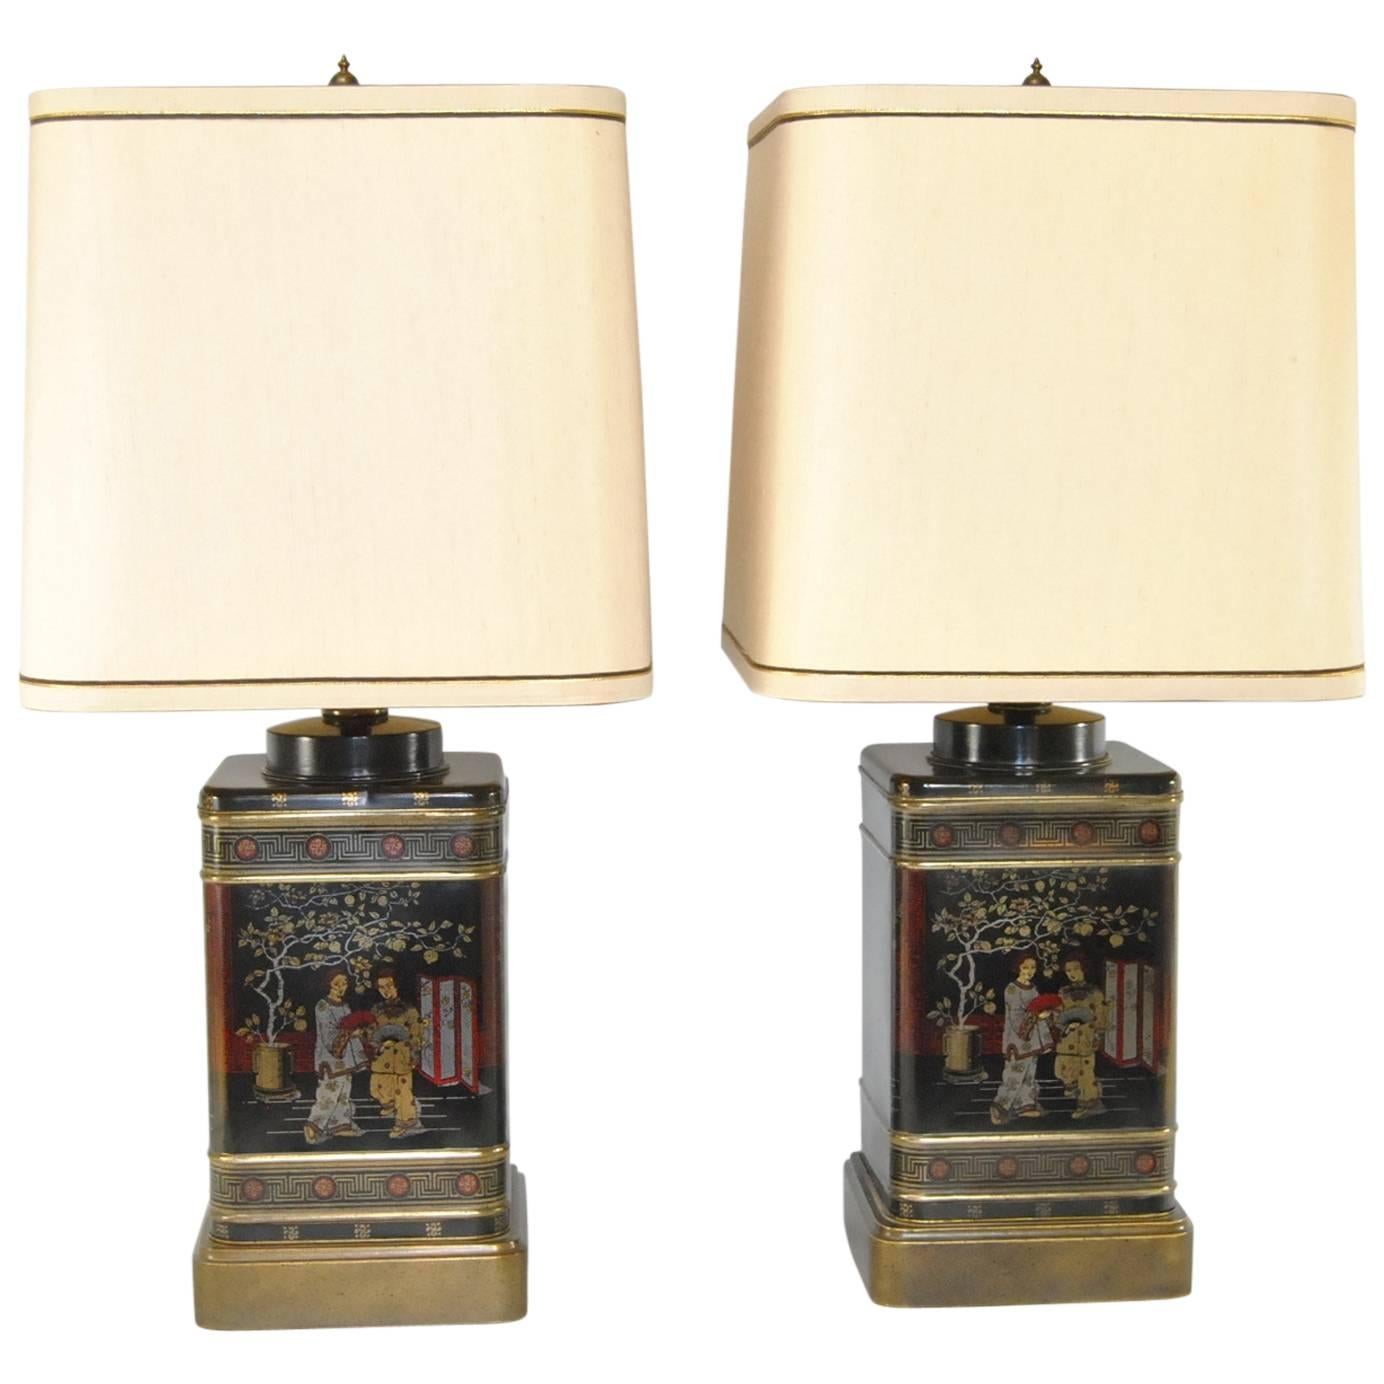 Pair of Black Asian Themed Tin Tea Canister Table Lamps by Frederick Cooper